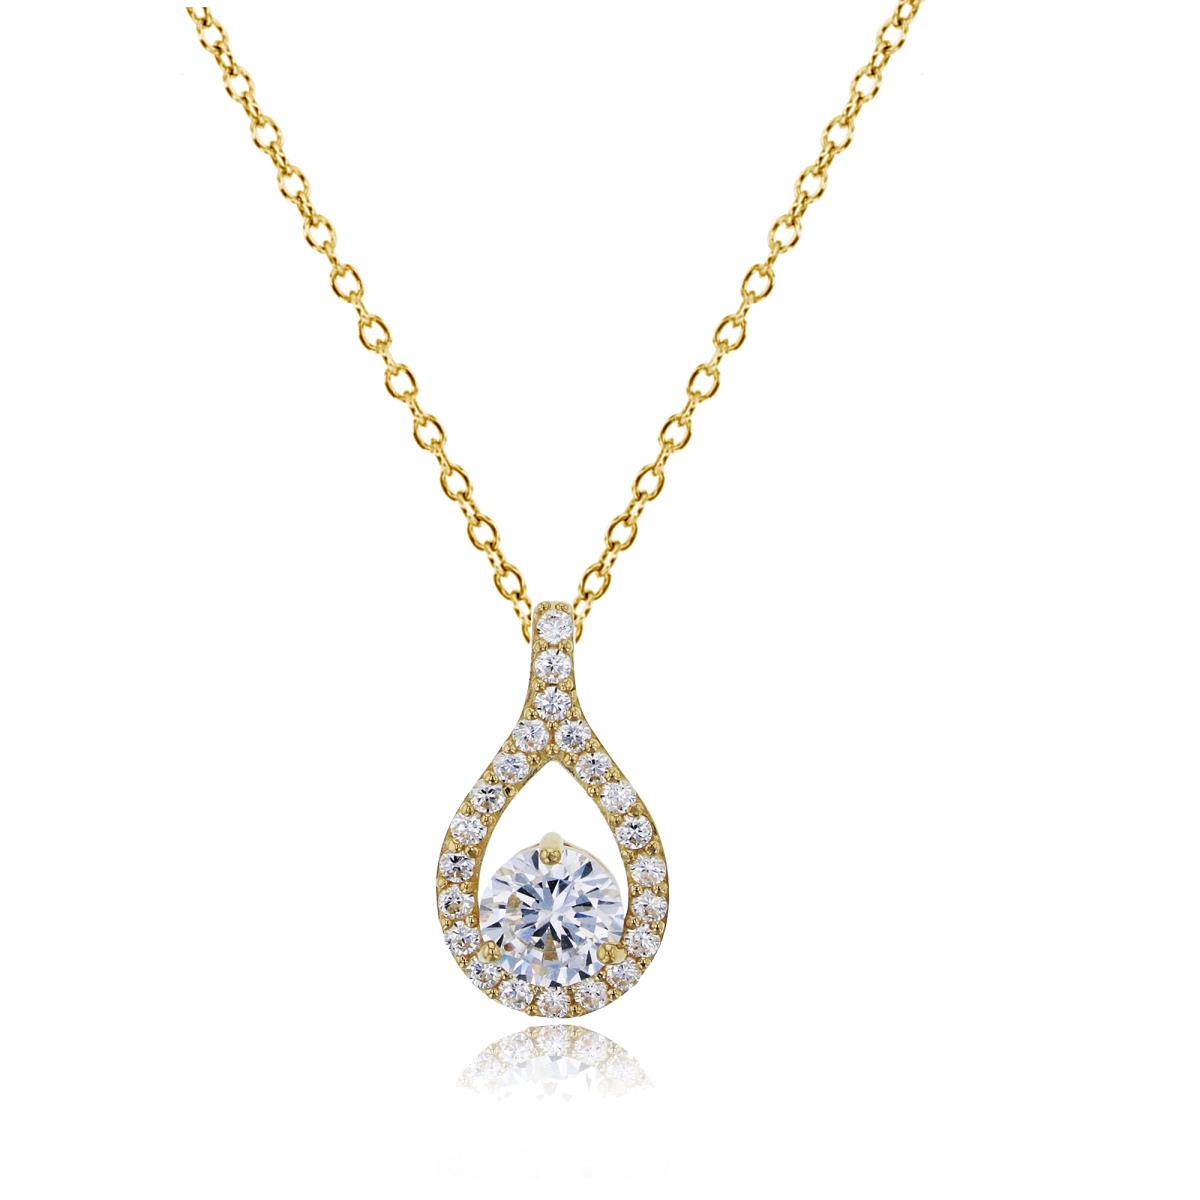 10K Yellow Gold 6mm Round Cut CZ Pear Shaped 18" Necklace